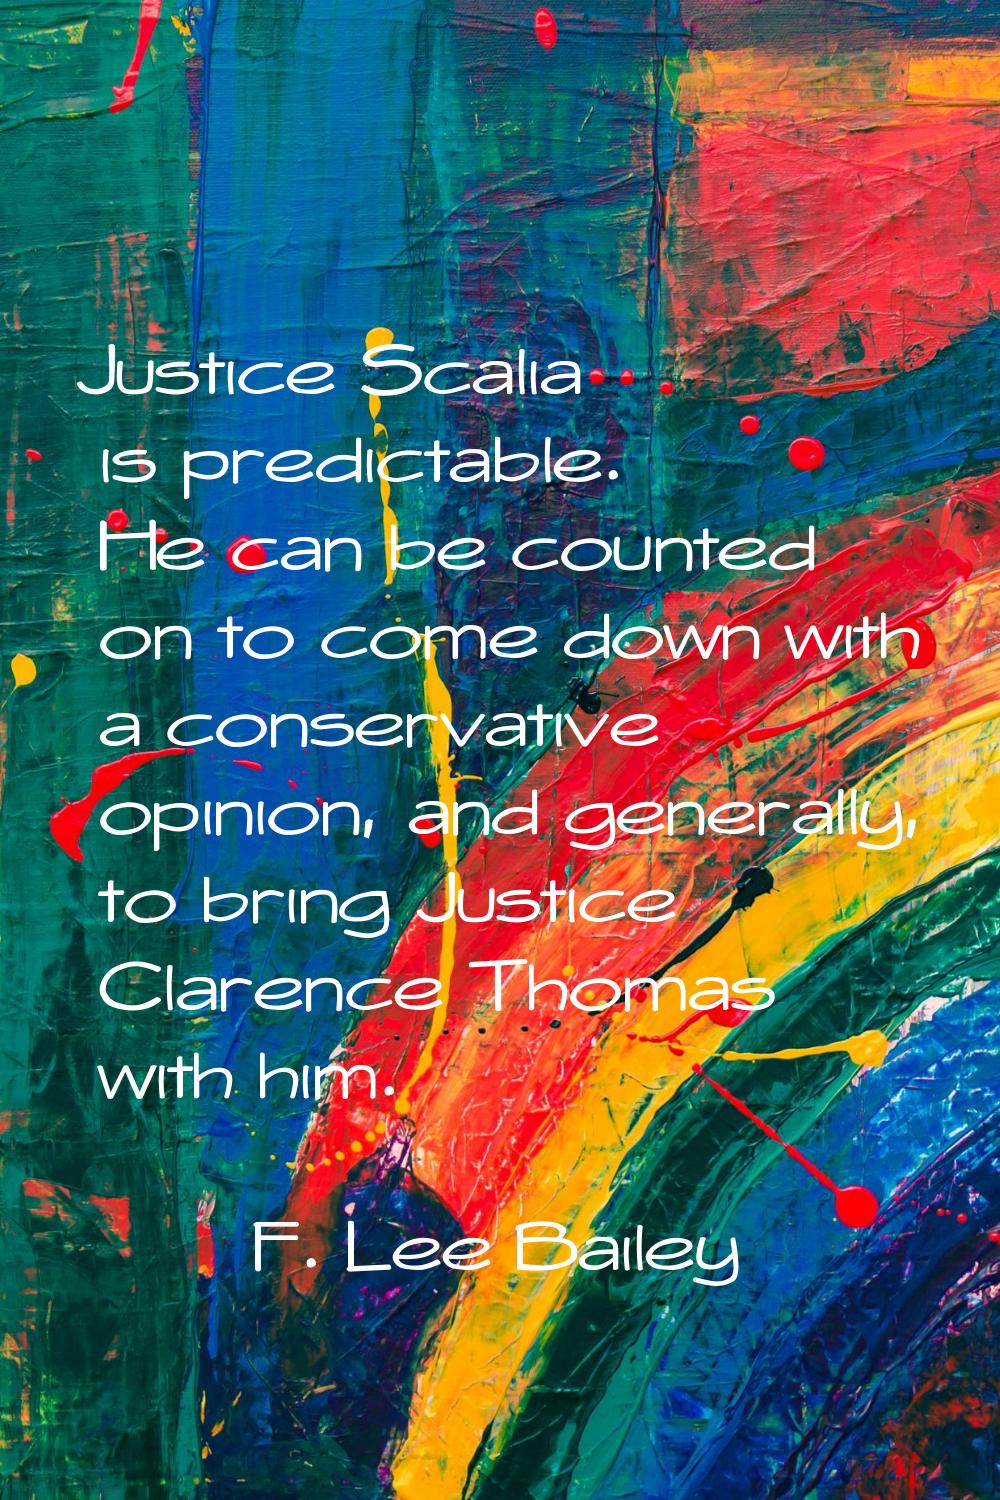 Justice Scalia is predictable. He can be counted on to come down with a conservative opinion, and g